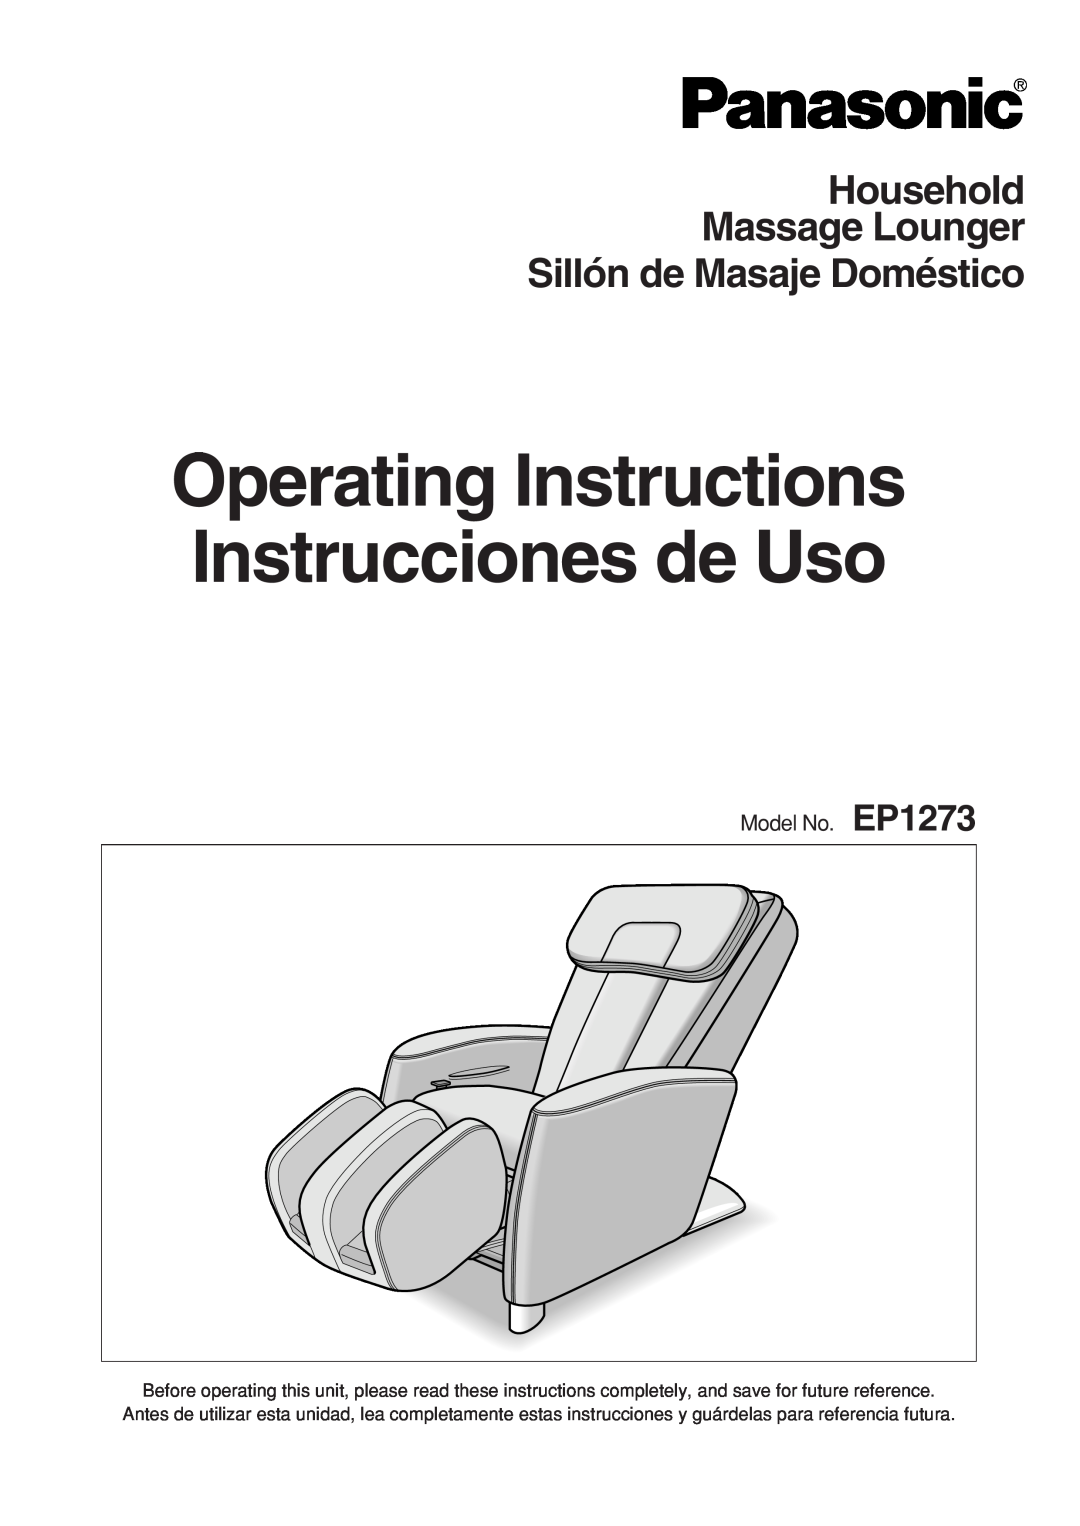 Panasonic EP1273 operating instructions Operating Instructions Instrucciones de Uso, Household Massage Lounger 